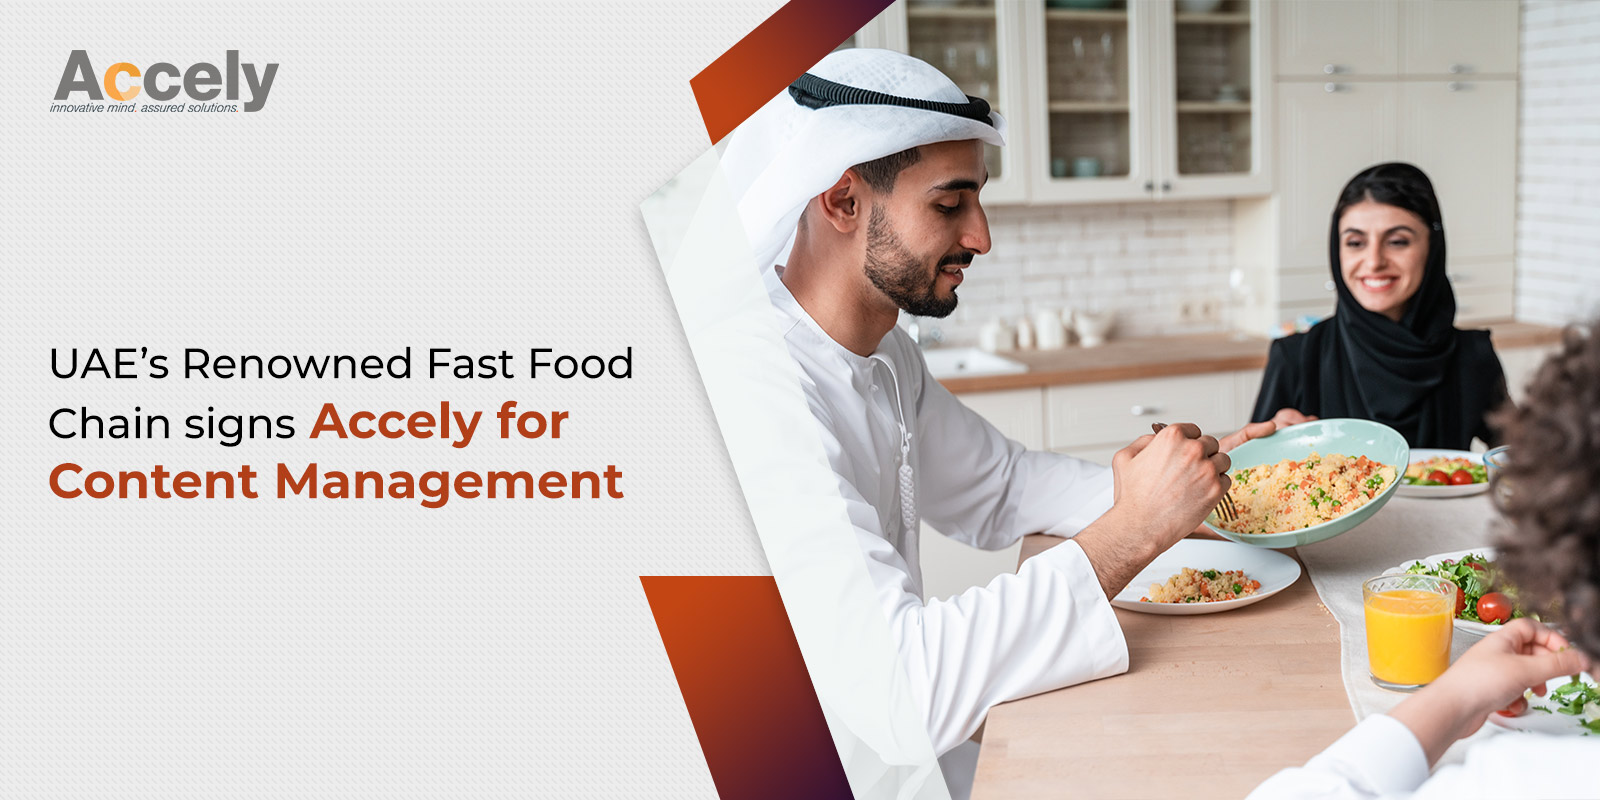 UAE’s Renowned Fast Food Chain signs Accely for Content Management